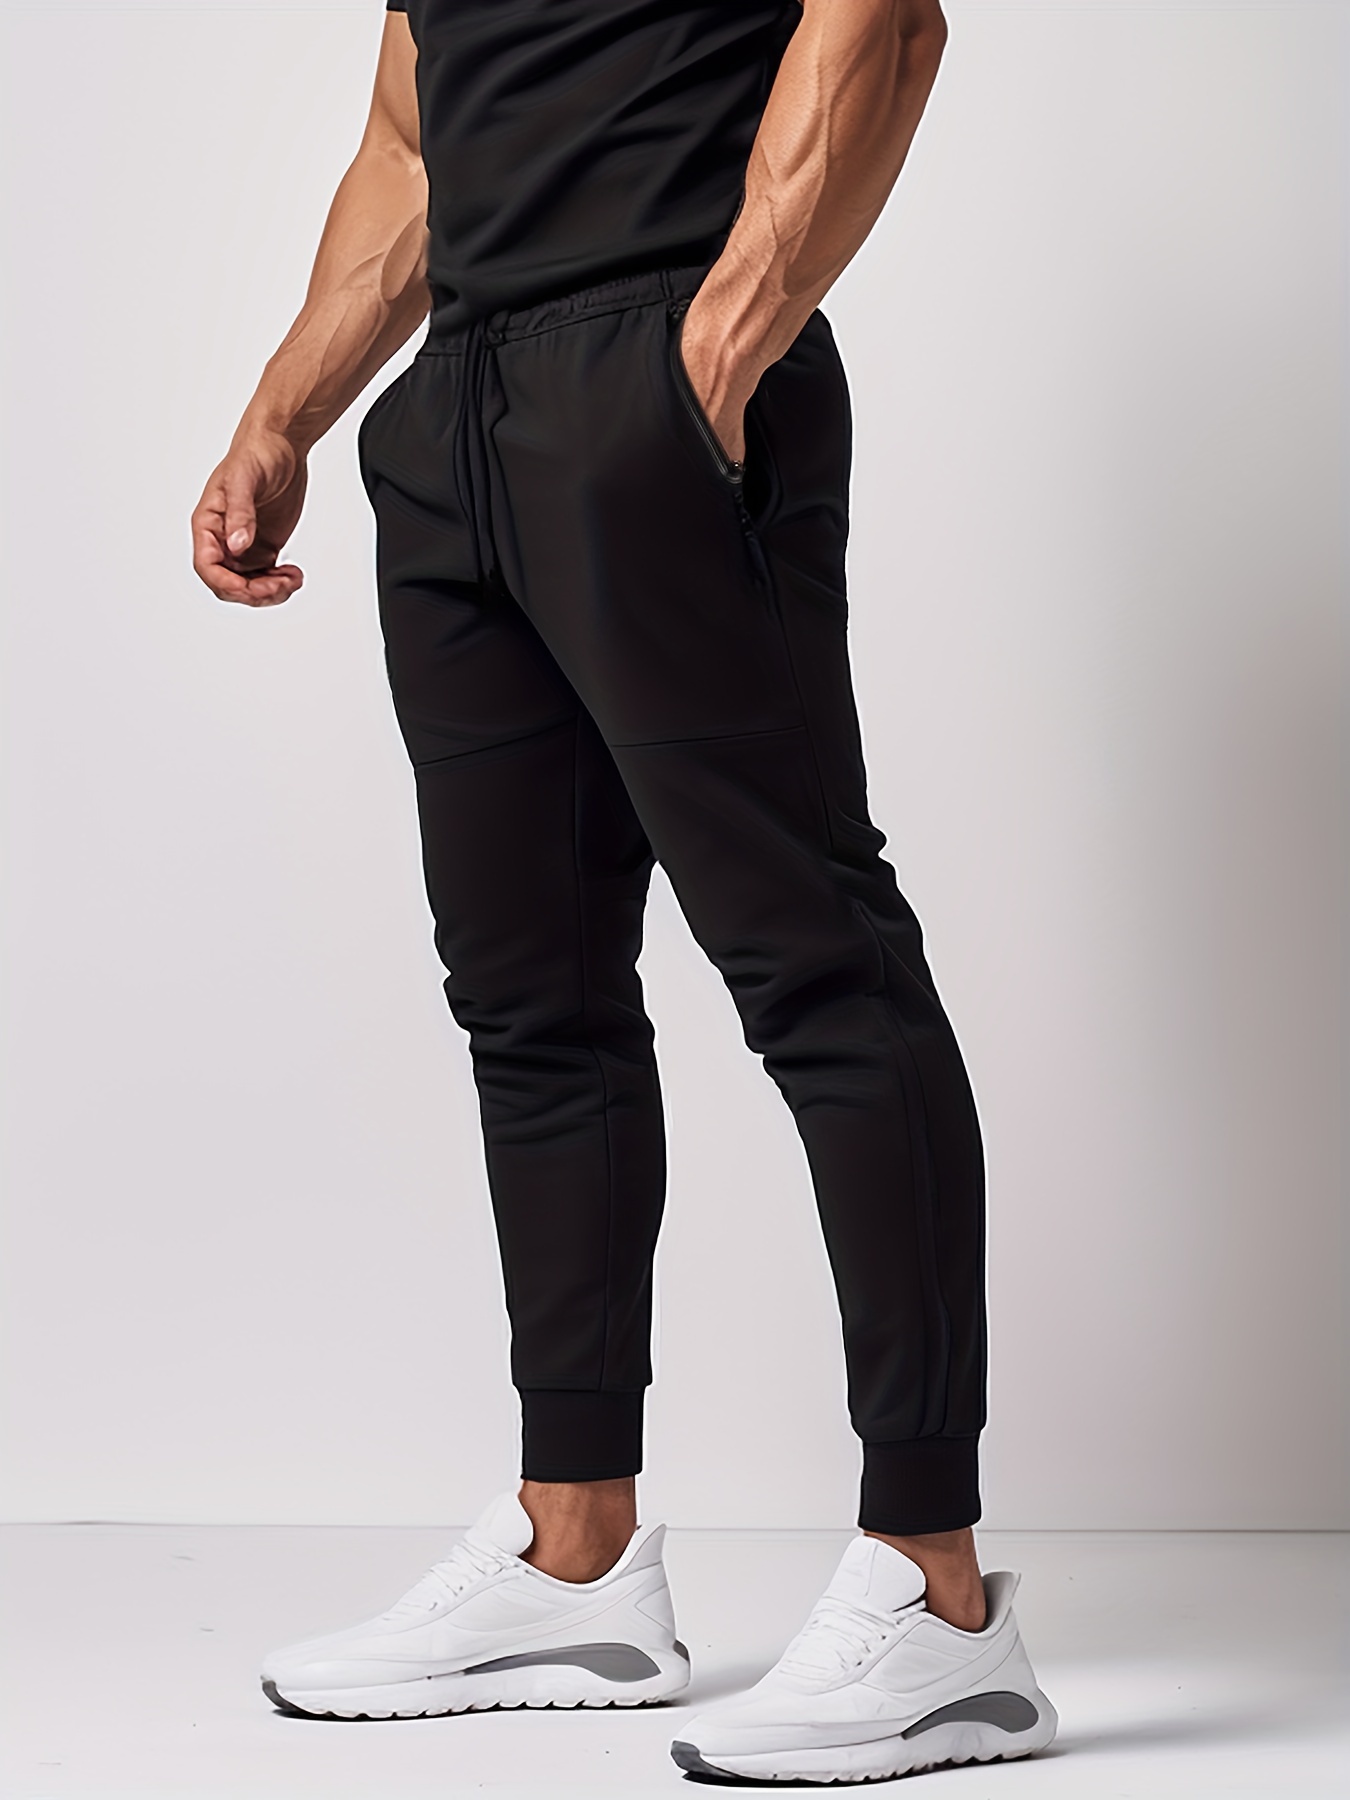 Jockey Athleisure Regular Fit Track Pant for Men with Drawstring